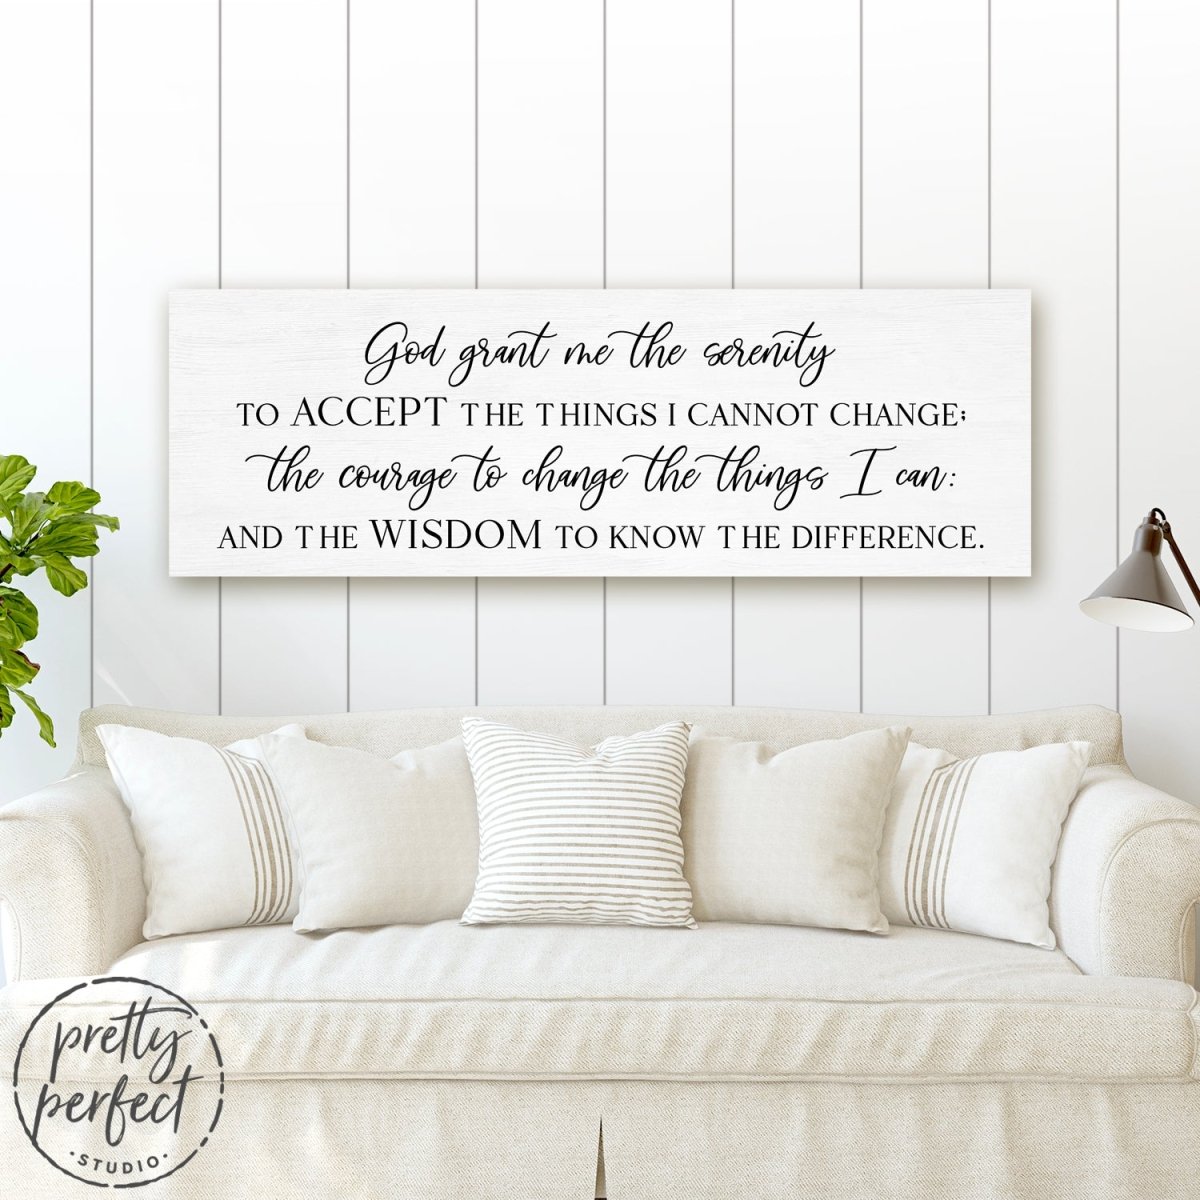 Serenity Prayer Sign in Living Room Above Couch - Motivational Wall Art - Pretty Perfect Studio